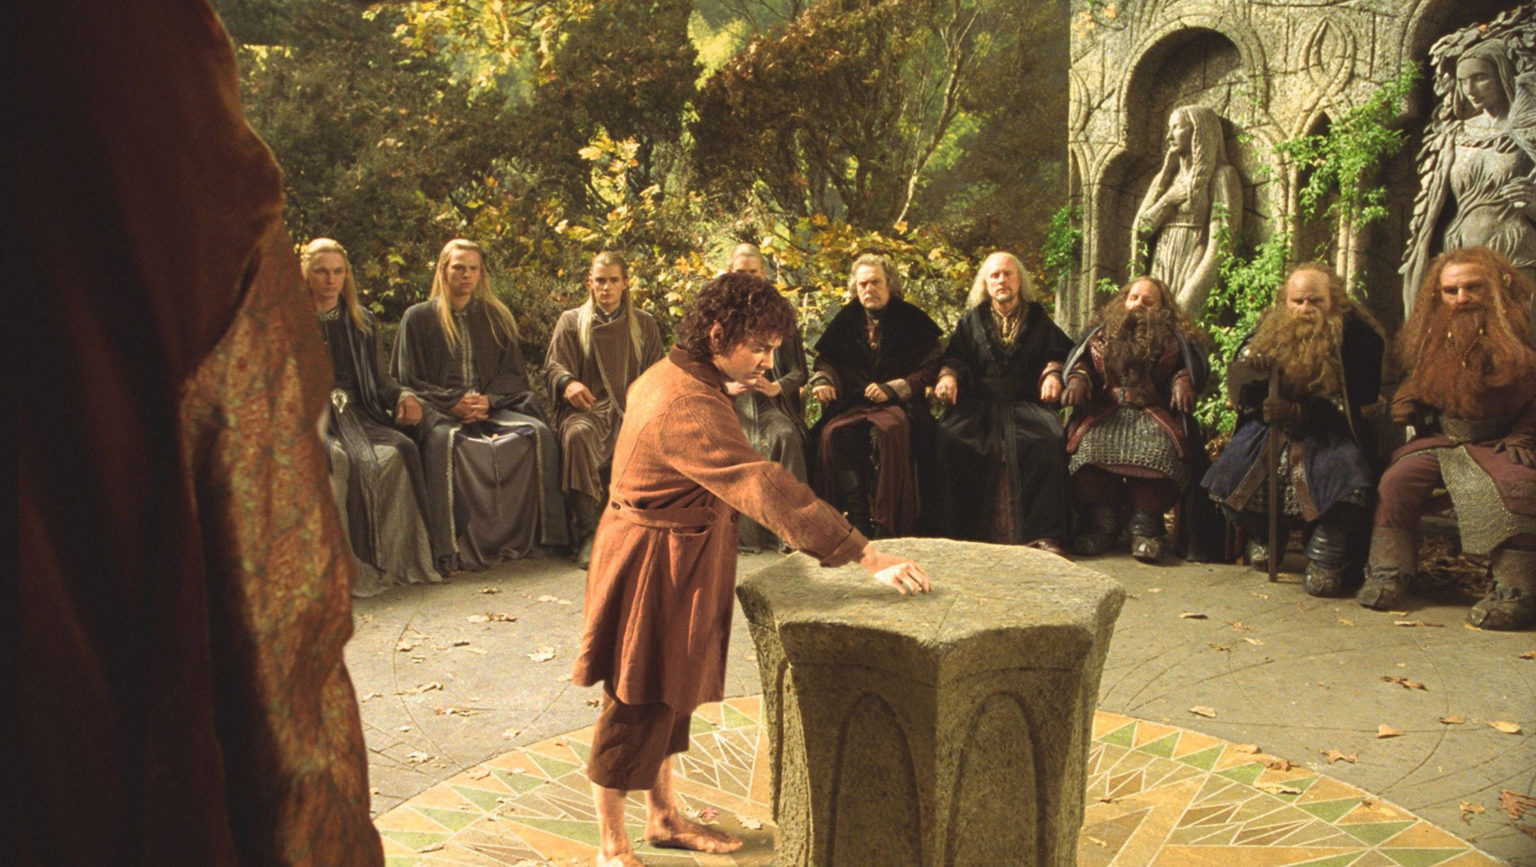 Fellowship Of The Ring Duration J.R.R. Tolkien and the Necessity of Hope – Henry T. Edmondson III